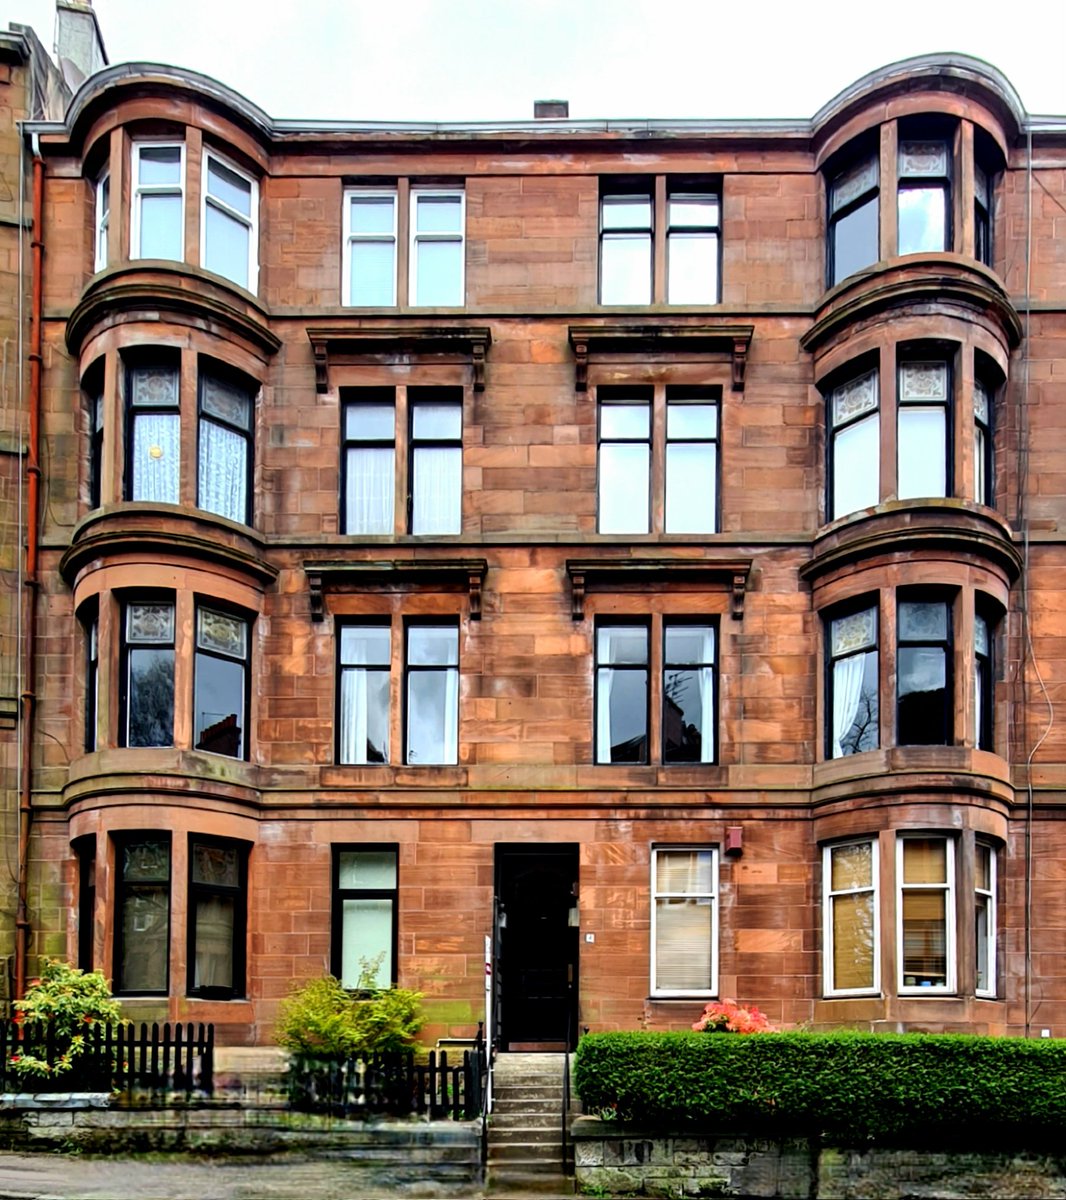 Red sandstone tenement on Caird Drive in the Partickhill area of Glasgow.

#glasgow #tenement #architecture #glasgowbuildings #partickhill #glasgowtenement #buildingphotography #architecturephotography